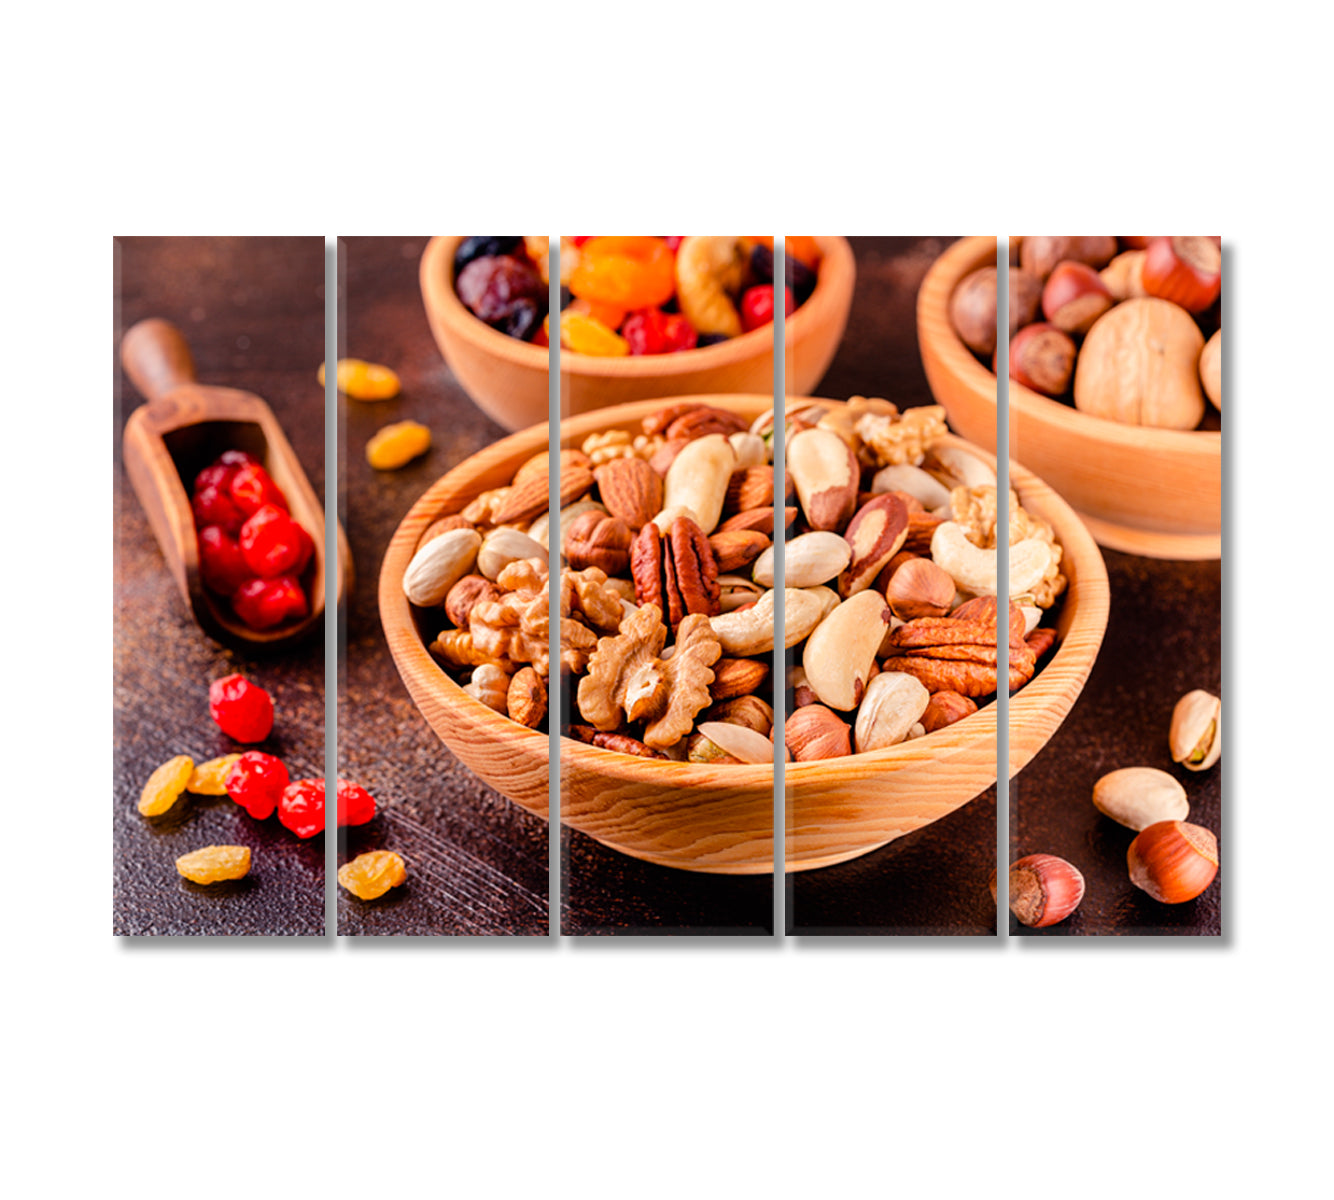 Nuts and Dried Fruit Canvas Print-Canvas Print-CetArt-5 Panels-36x24 inches-CetArt